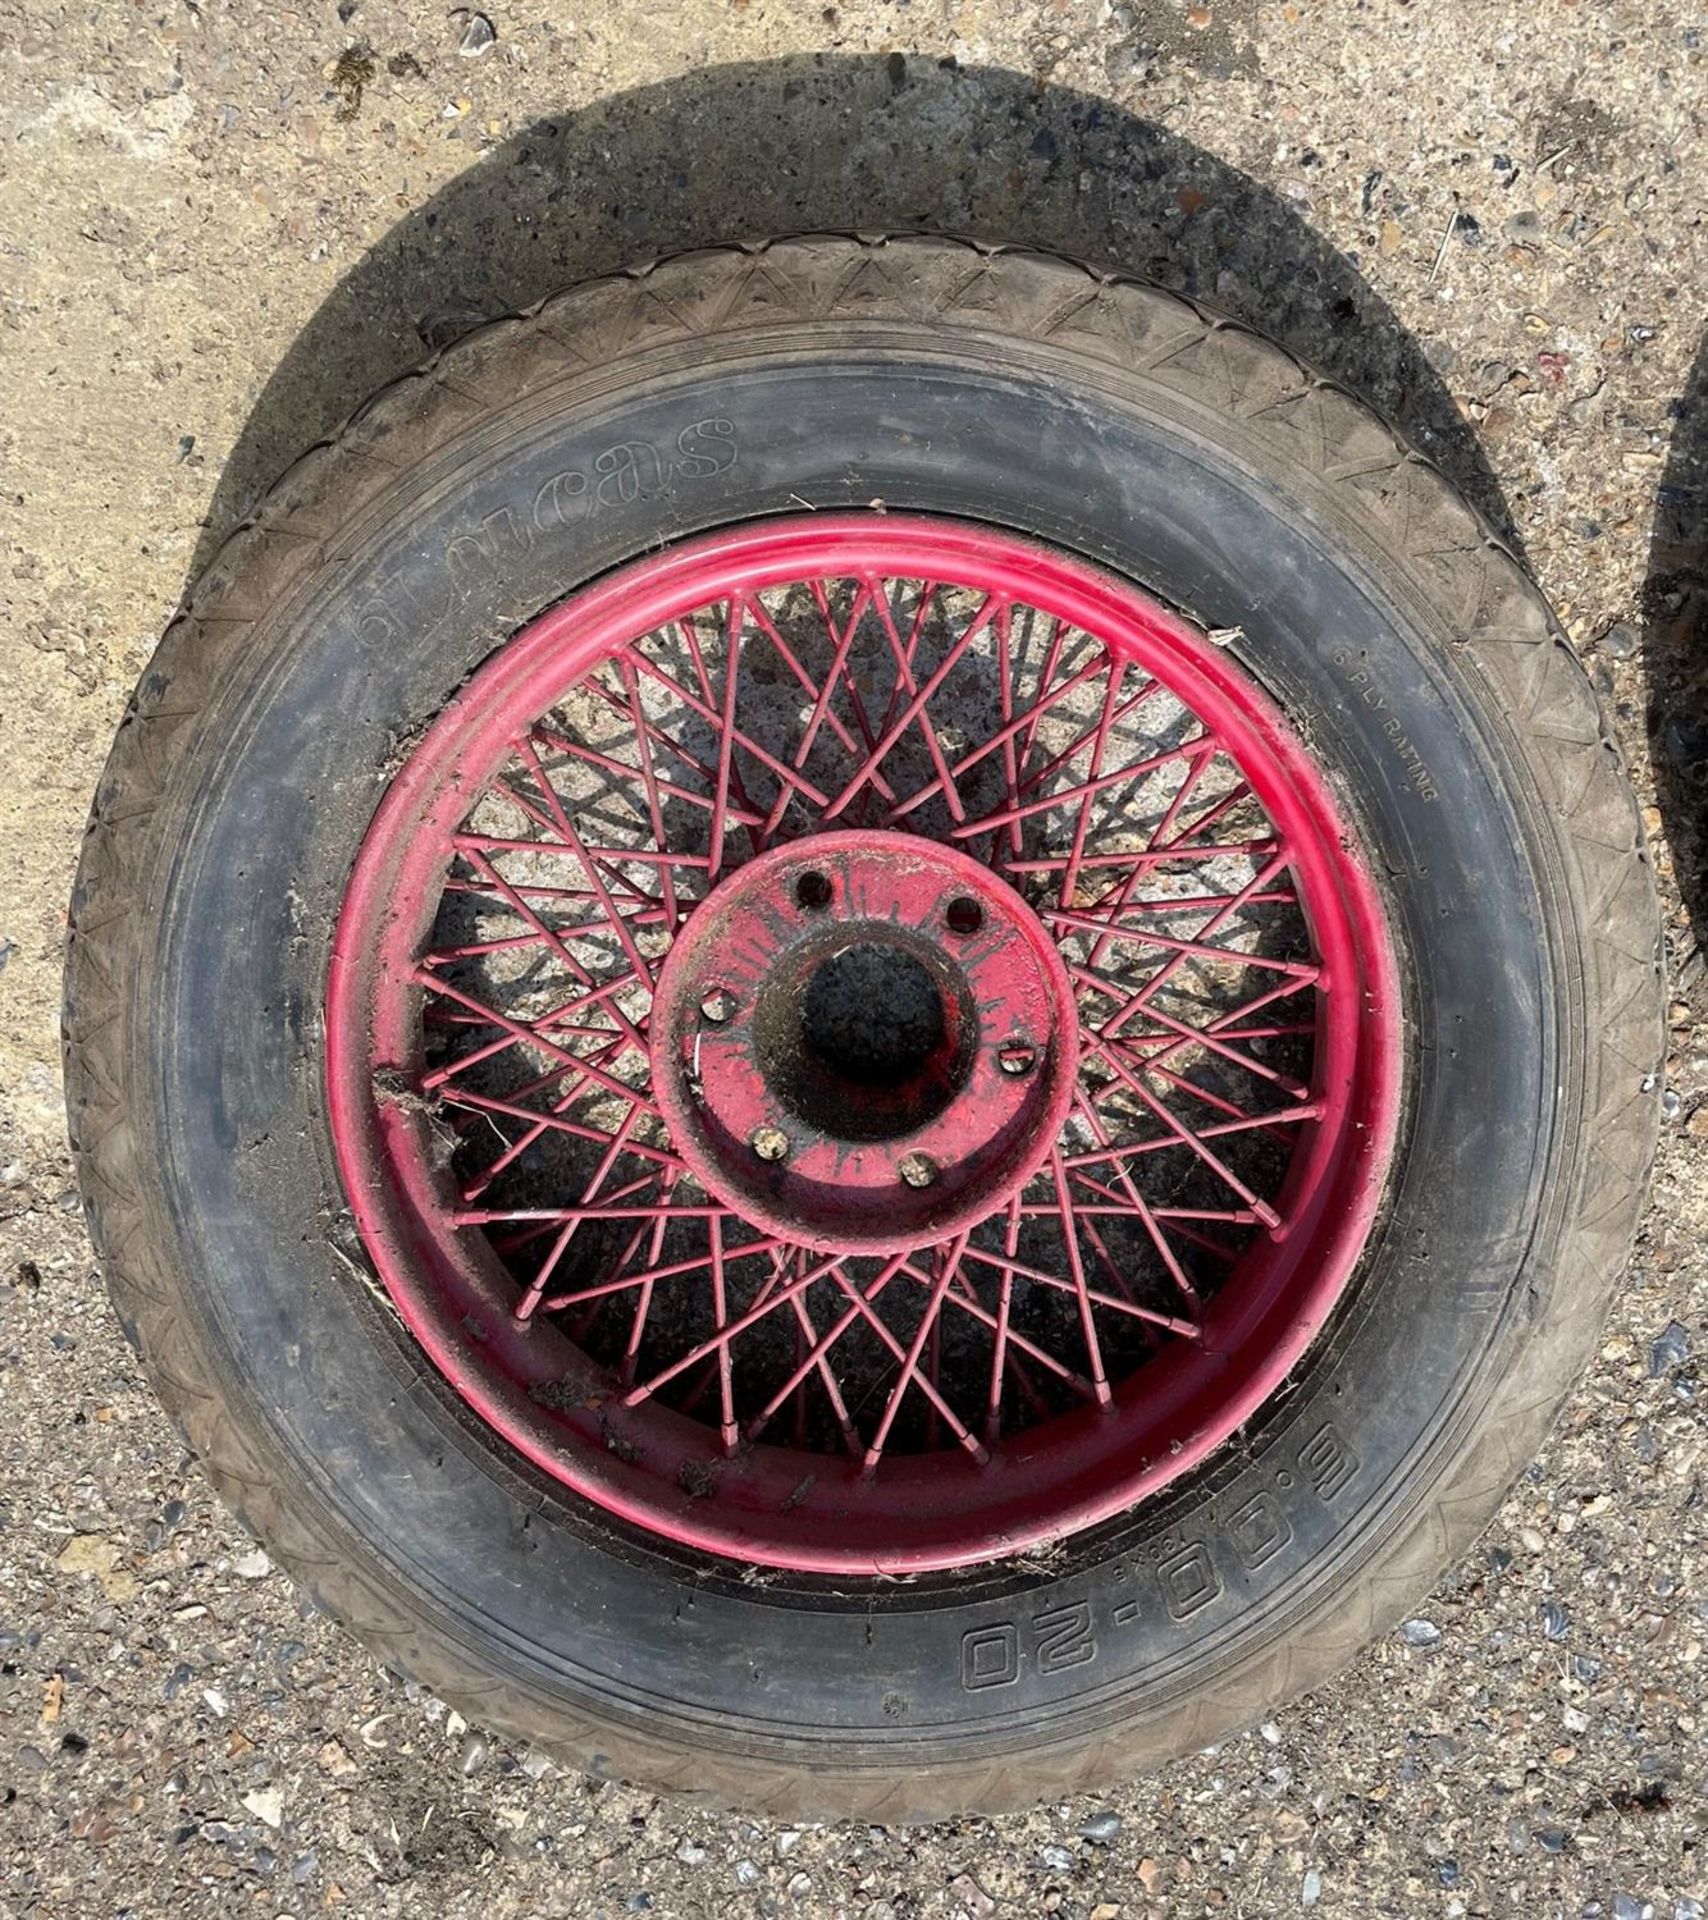 A Pair Dodge Spoked Wheels Fitted with 600/20 Older Tyres - Image 4 of 7